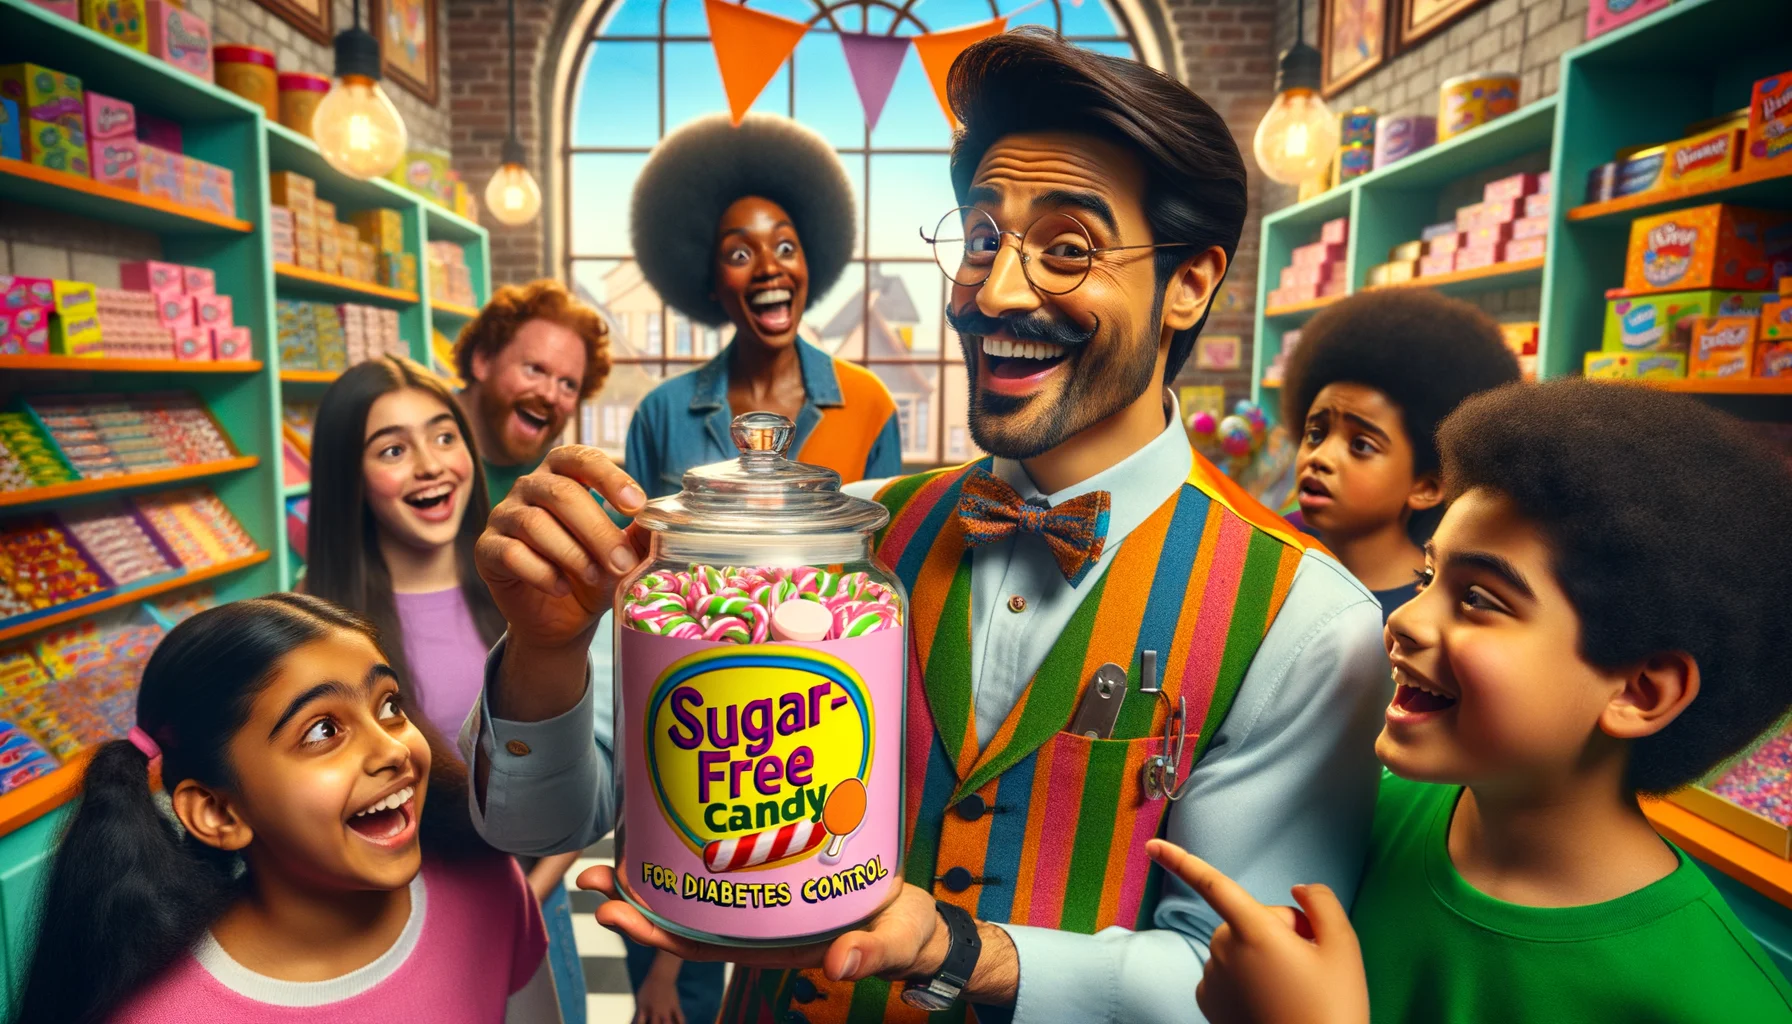 Imagine a comedic but realistic scenario centered around 'Sugar-Free Candy for Diabetes Control'. In a brightly lit, quirky candy store filled with colorful shelves, a bespectacled, grinning South Asian male shopkeeper in a vibrant waistcoat holds aloft a large jar labeled 'Sugar-Free Delights'. A Middle Eastern female customer in bright casual clothes is examining a piece of candy with a look of skeptical delight. They are surrounded by curious children of different descents: a Black girl laughing, a Caucasian boy pointing excitedly, and a Hispanic boy eagerly awaiting a candy taste. The scenario embodies the perfect blend of fun, sweetness, and control.